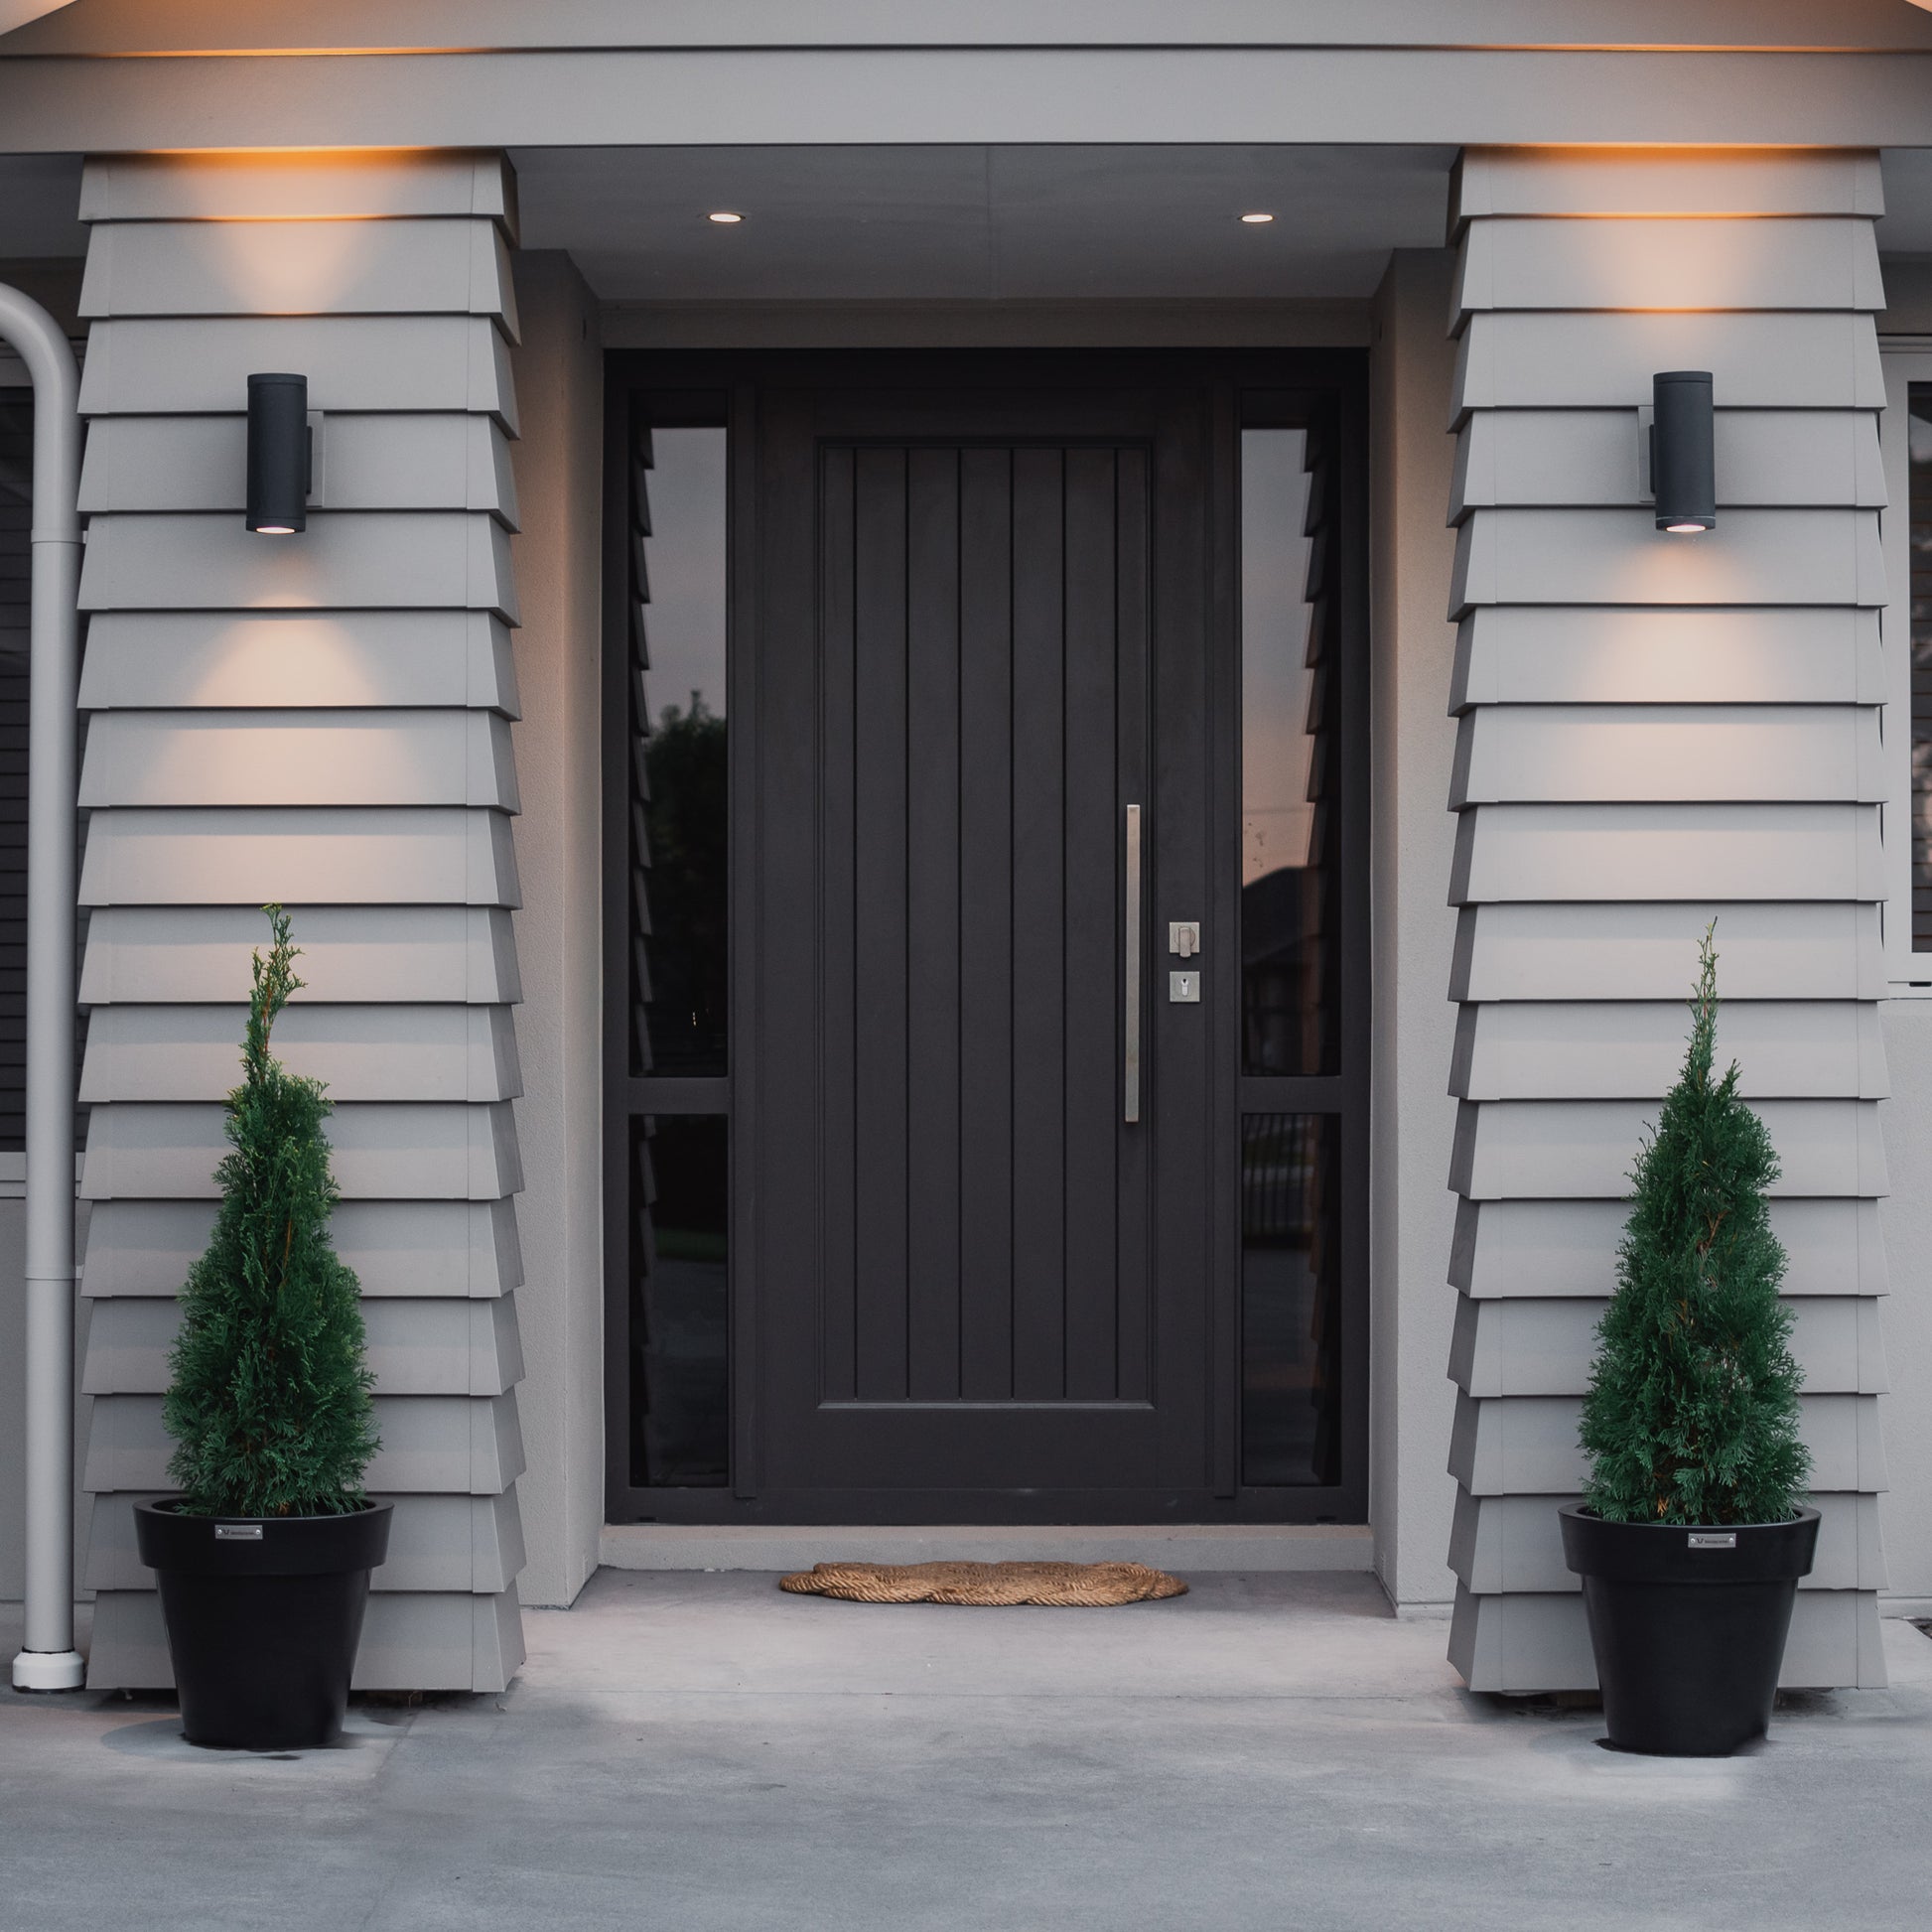 Black planter pots at an entranceway with a tree planted in them.